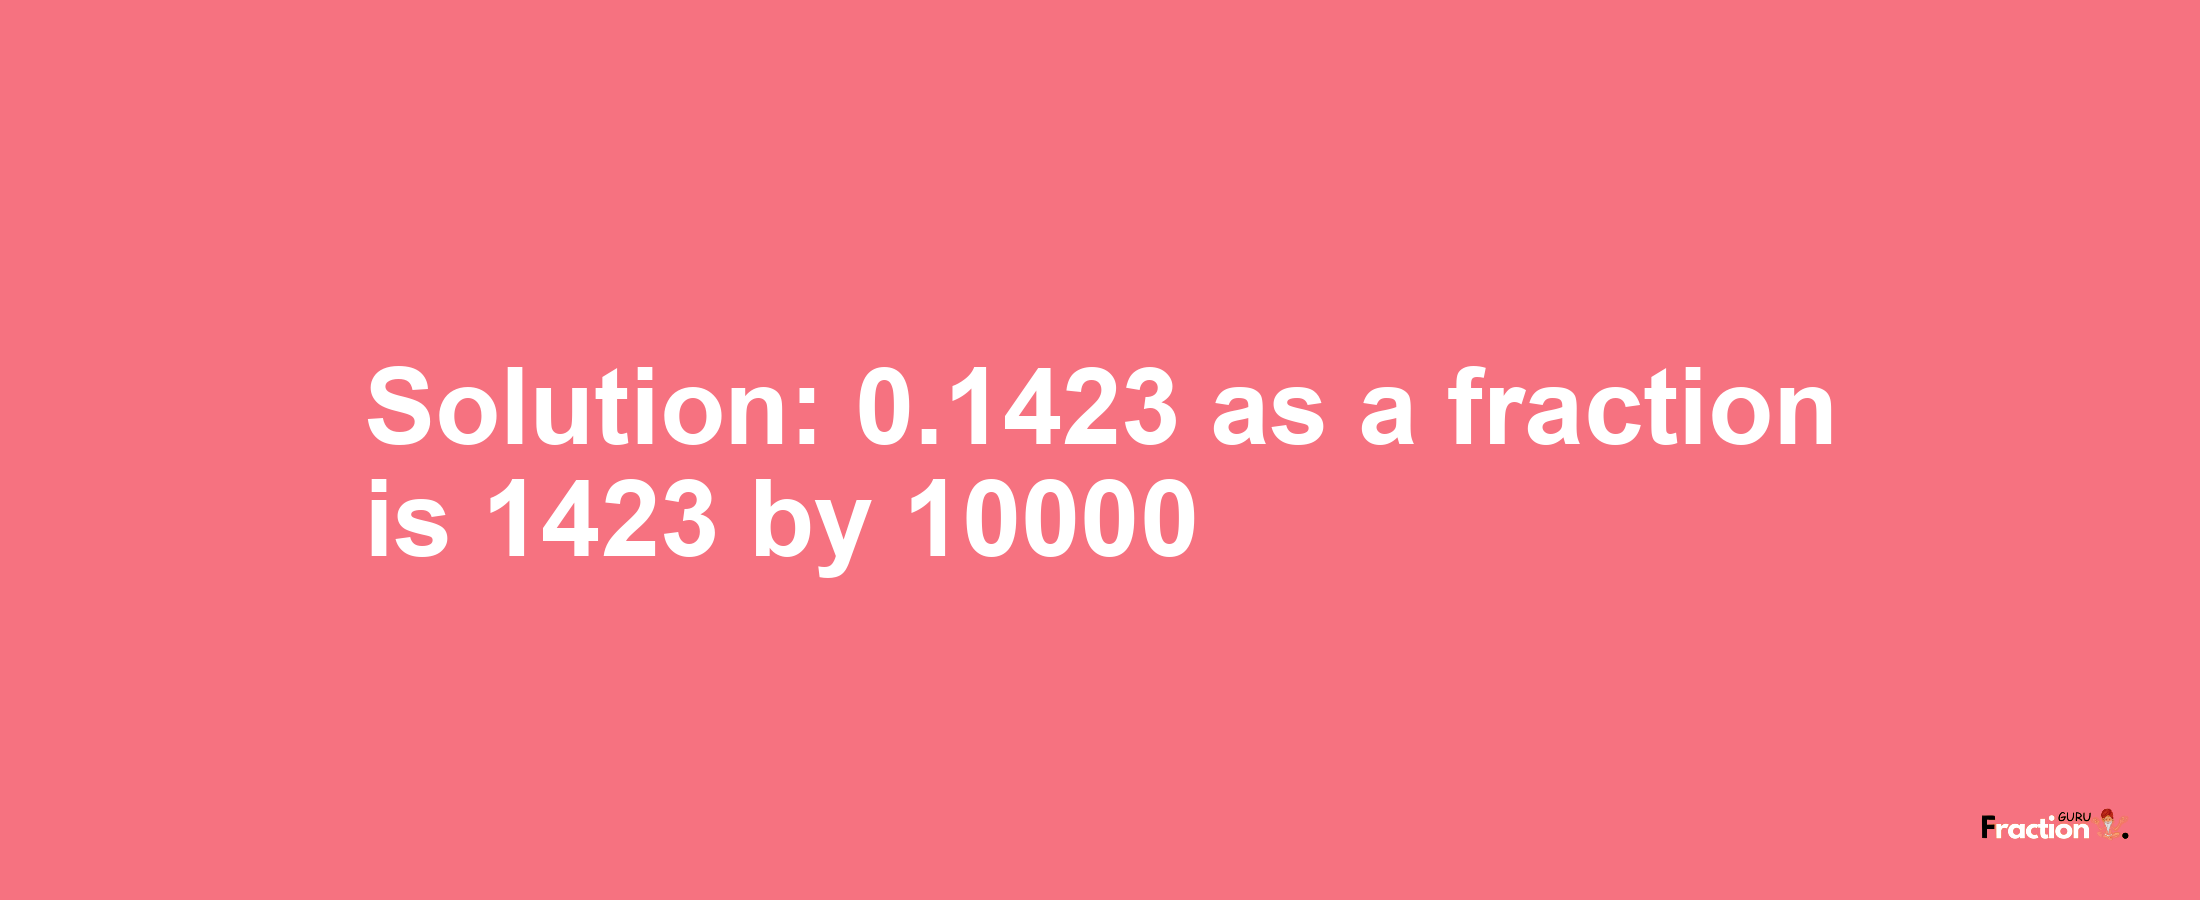 Solution:0.1423 as a fraction is 1423/10000